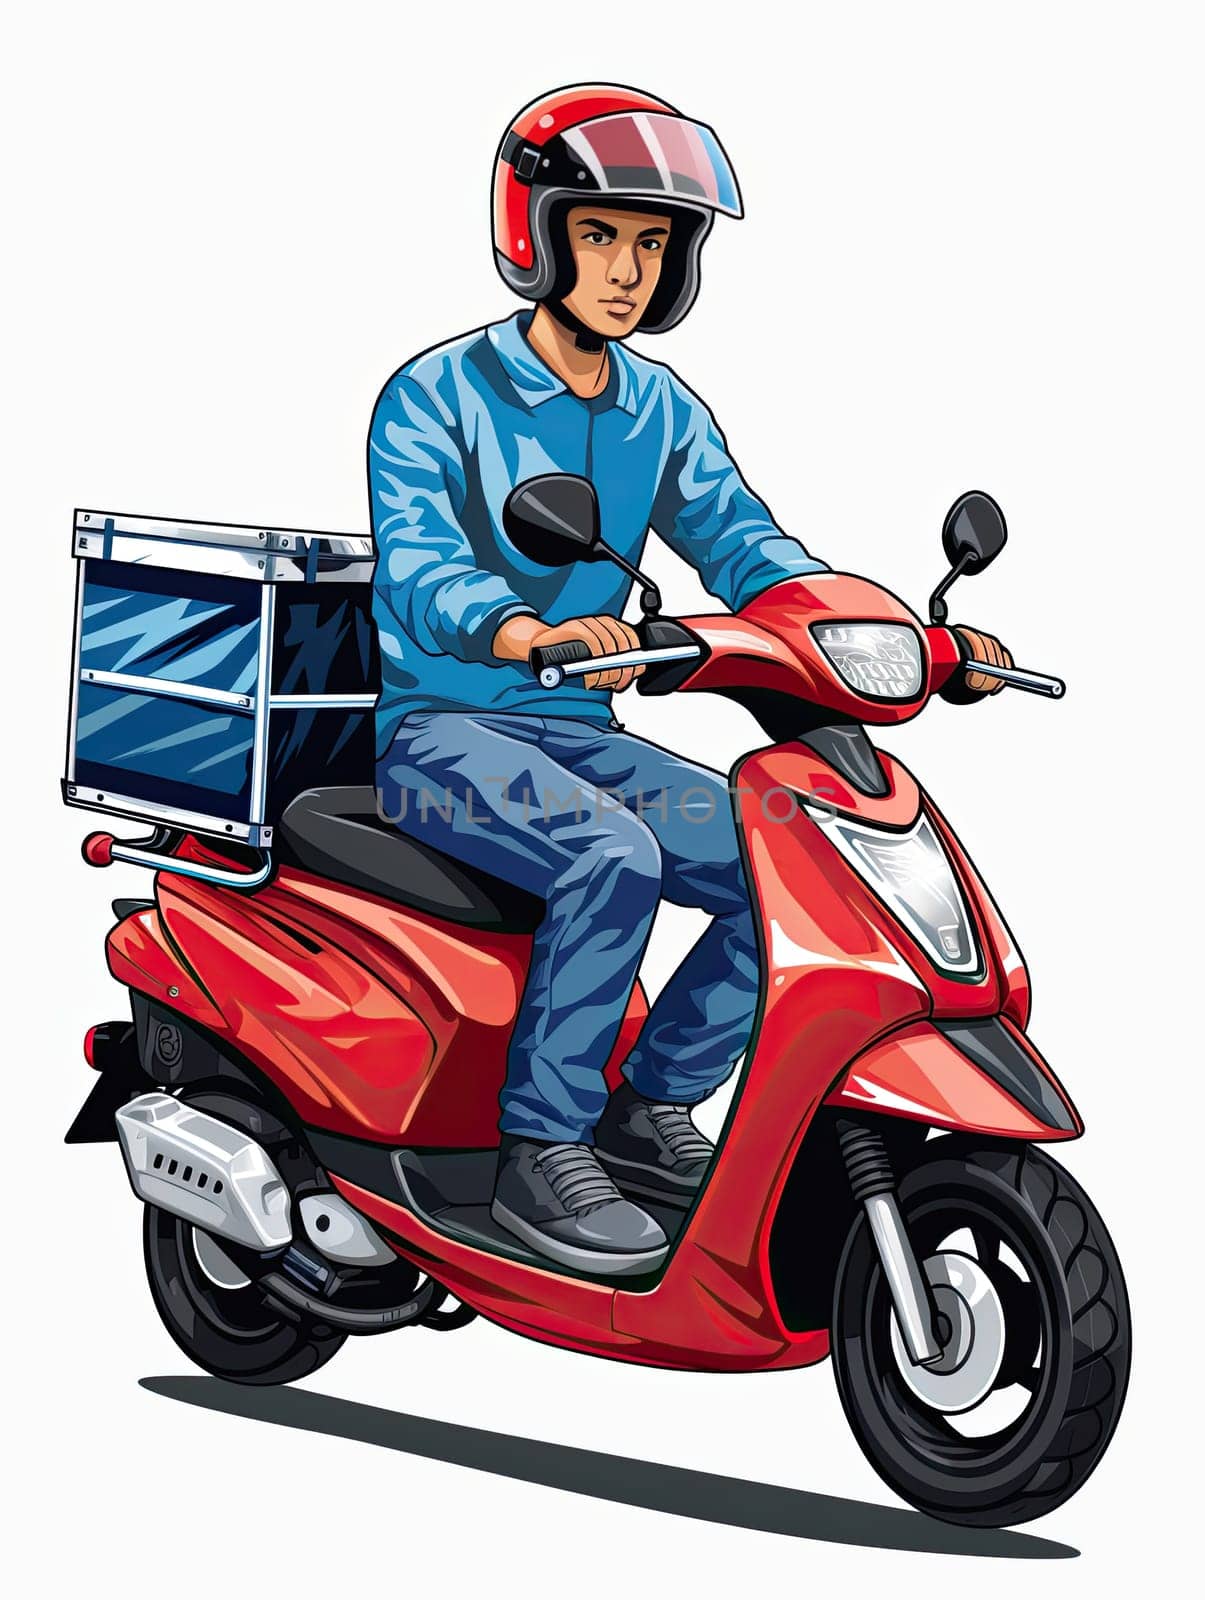 Courier on red motorcycle on white background, Food and goods delivery concept. Generative AI